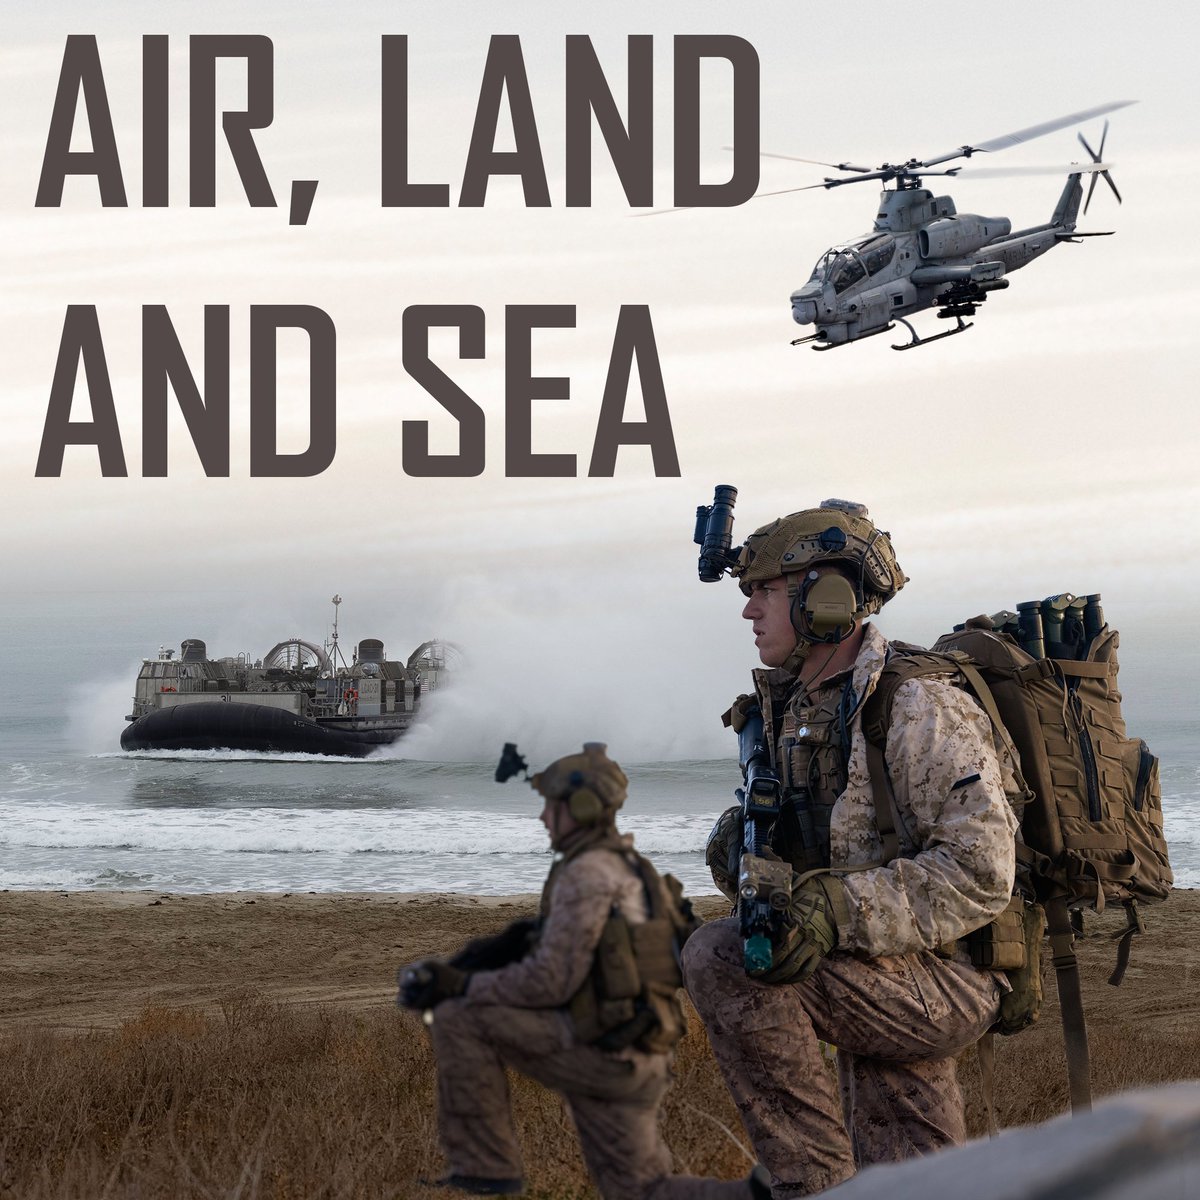 We Fight Our Country's Battles 1st Marine Division stands ready to respond to contingencies and is prepared to deploy as a scalable ground combat element to defeat peer, near-peer and hybrid threats across the range of military operations.